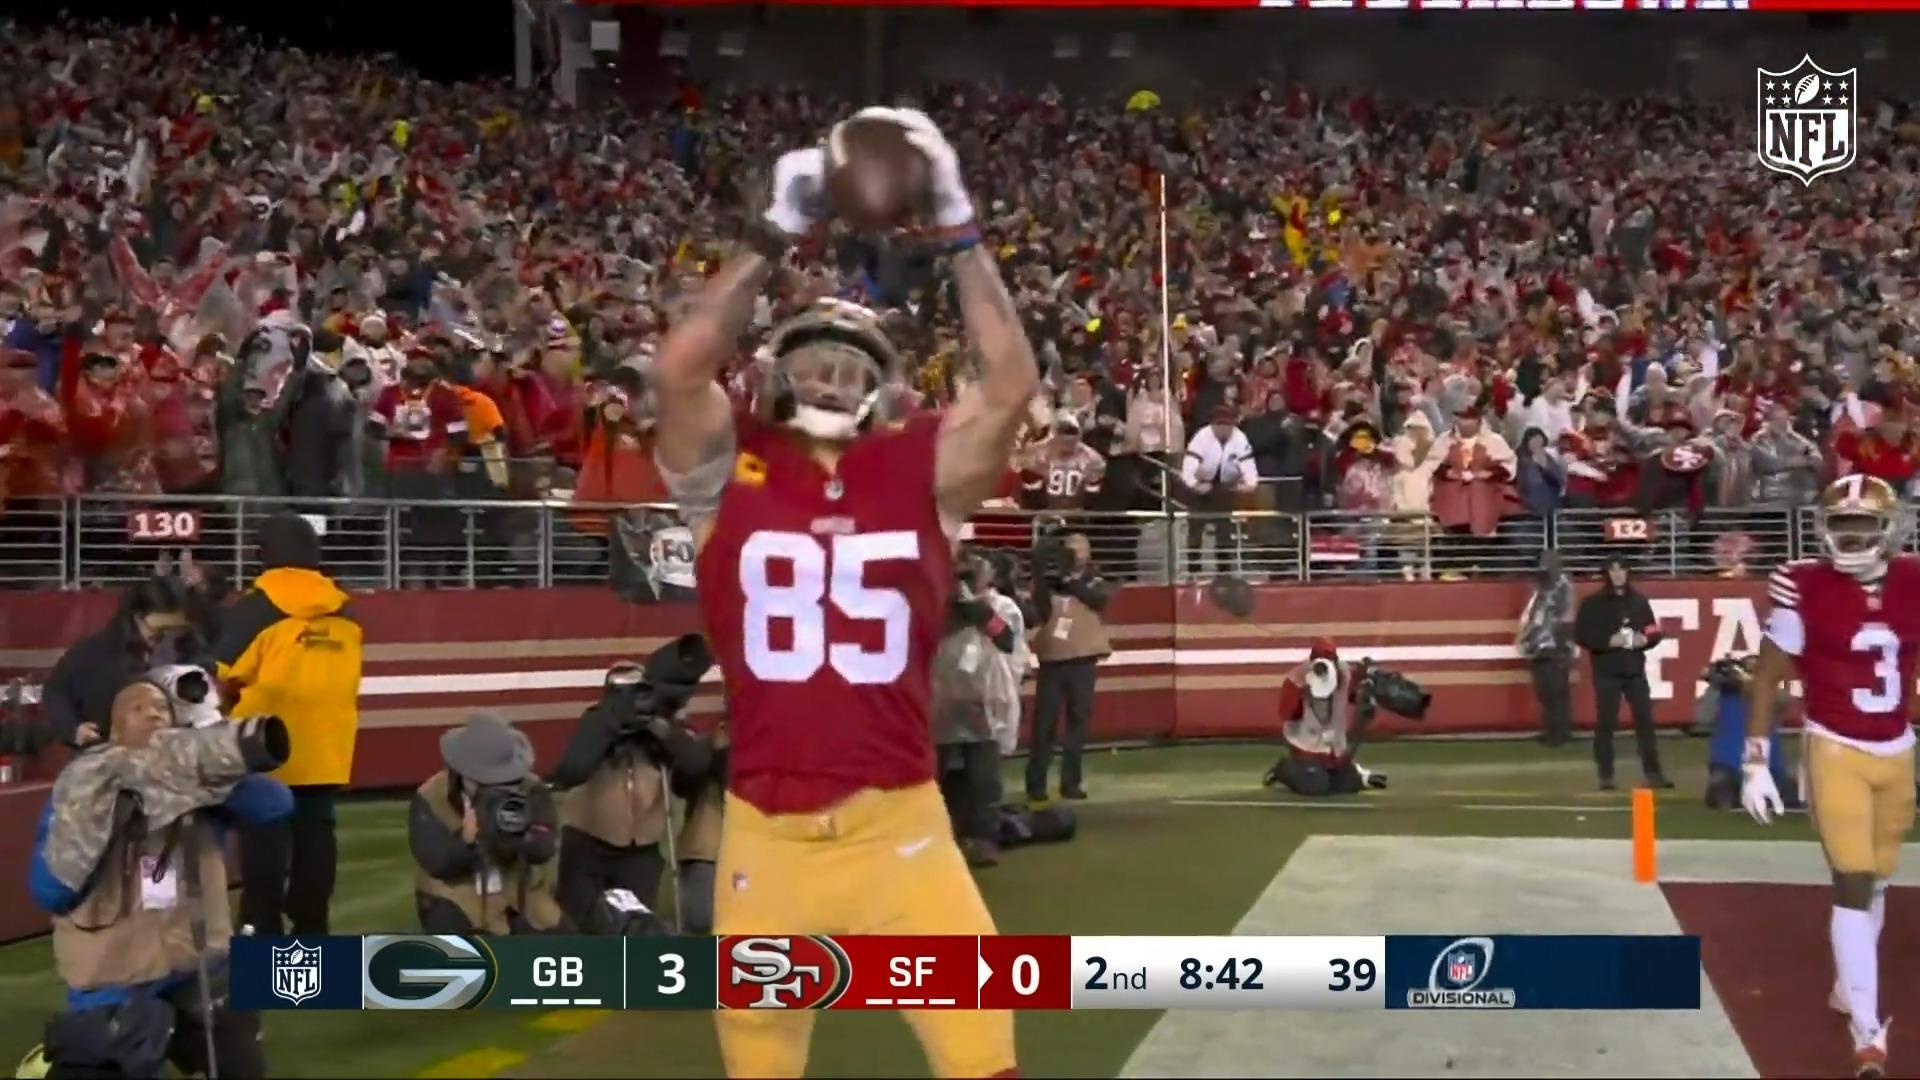 49ers prevail against Packers in playoff thriller The highlights in the video!